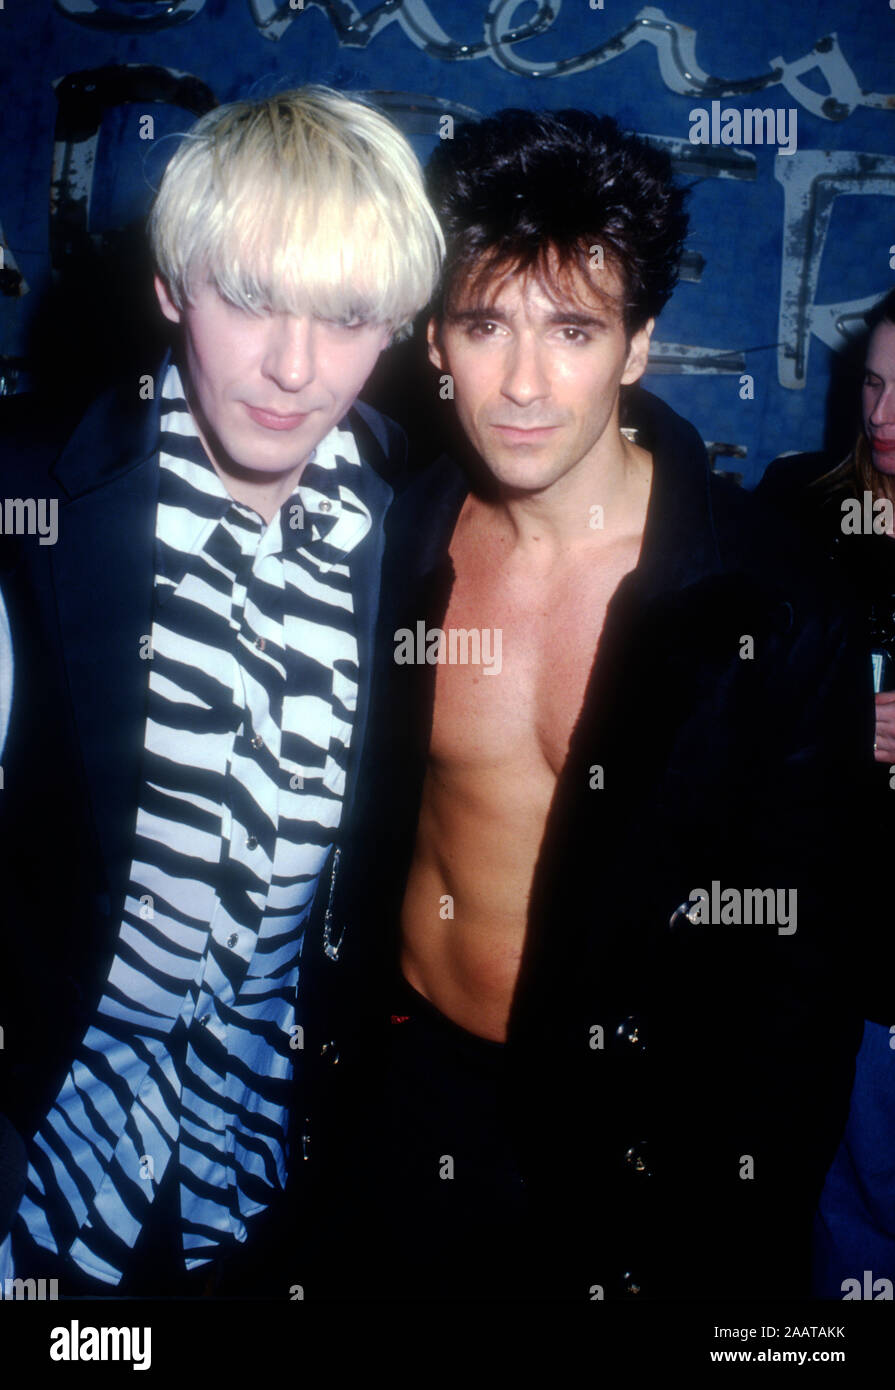 Las Vegas, Nevada, USA 11th March 1995 (L-R) Musicians Nick Rhodes and Warren Cuccurullo of Duran Duran attend the Grand Opening Celebration of the Hard Rock Hotel hosted by Peter Morgan on March 11, 1995 at The Hard Rock Hotel Las Vegas in Las Vegas, Nevada, USA. Photo by Barry King/Alamy Stock Photo Stock Photo